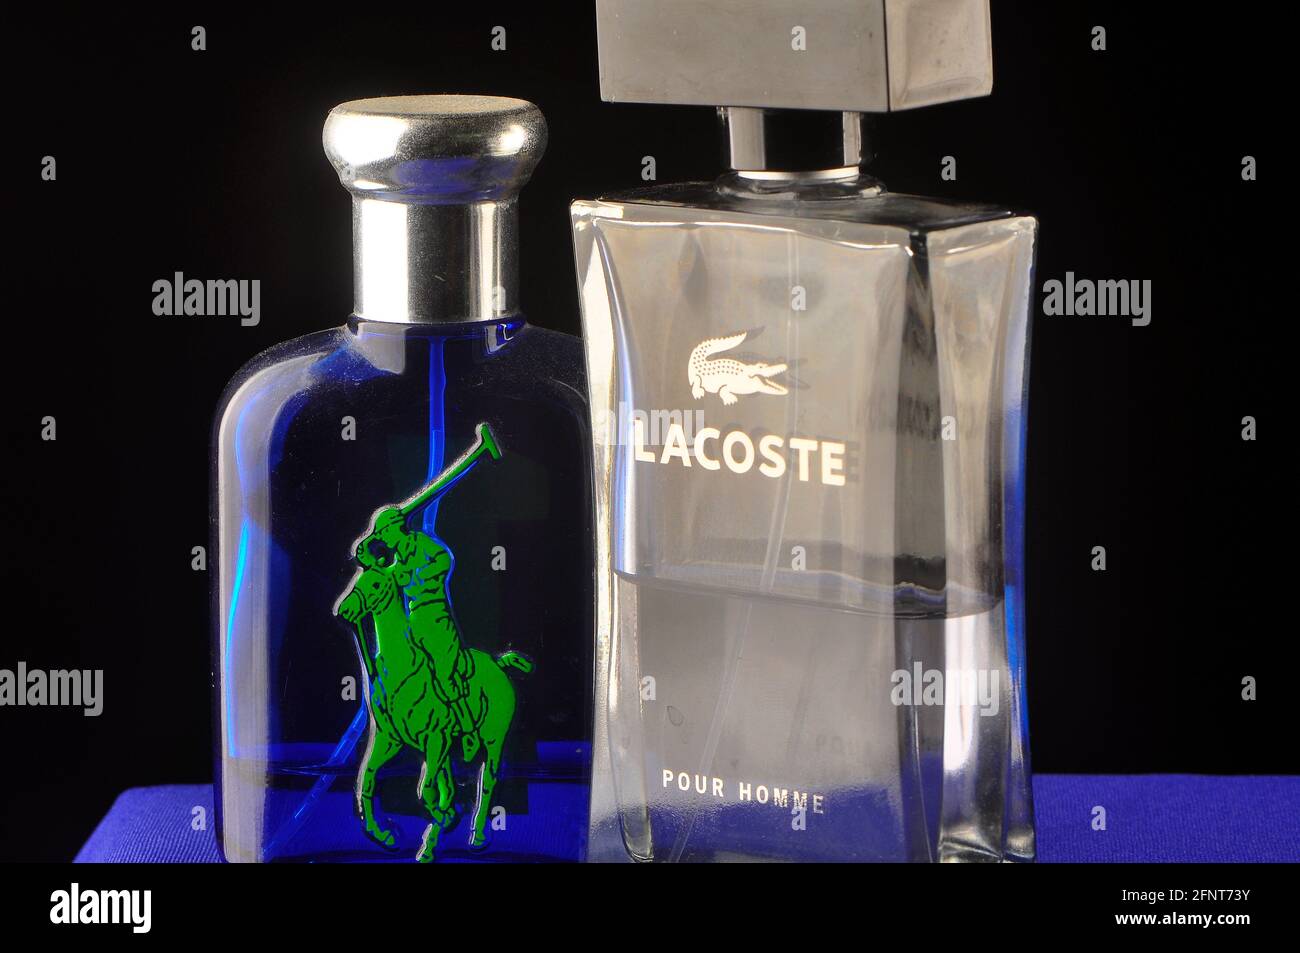 Lacoste and Polo parfum Stock Photo